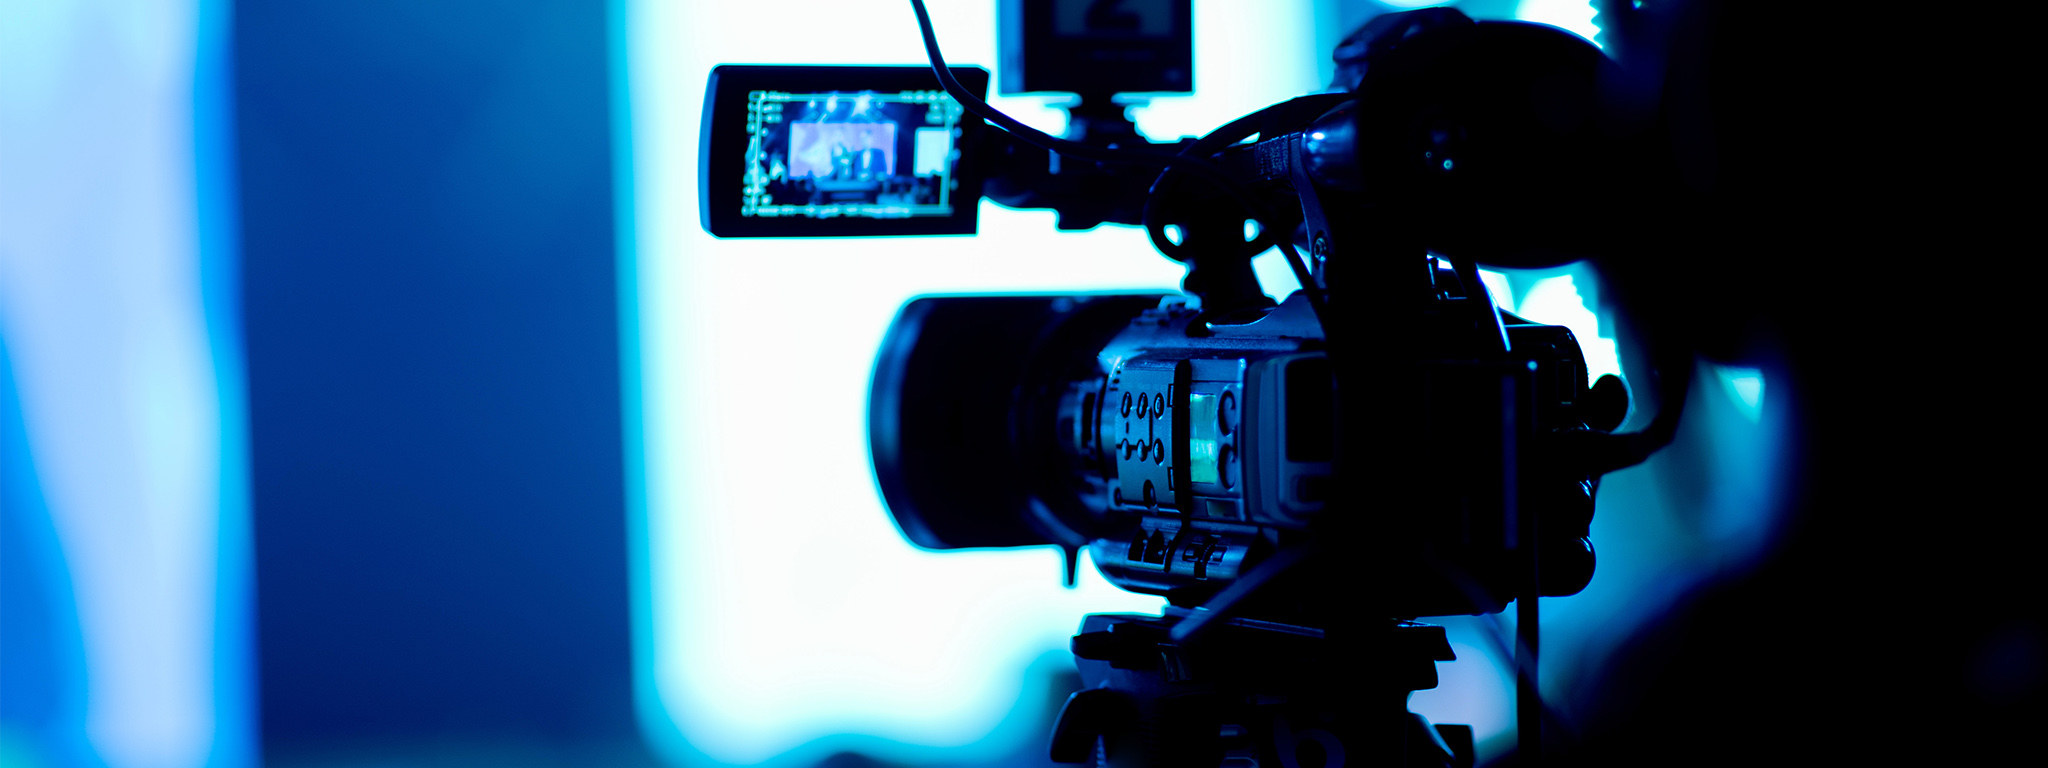 A person in soft focus operates a camera in a dark room with various peripherals attached, a display showing on a fold out arm.